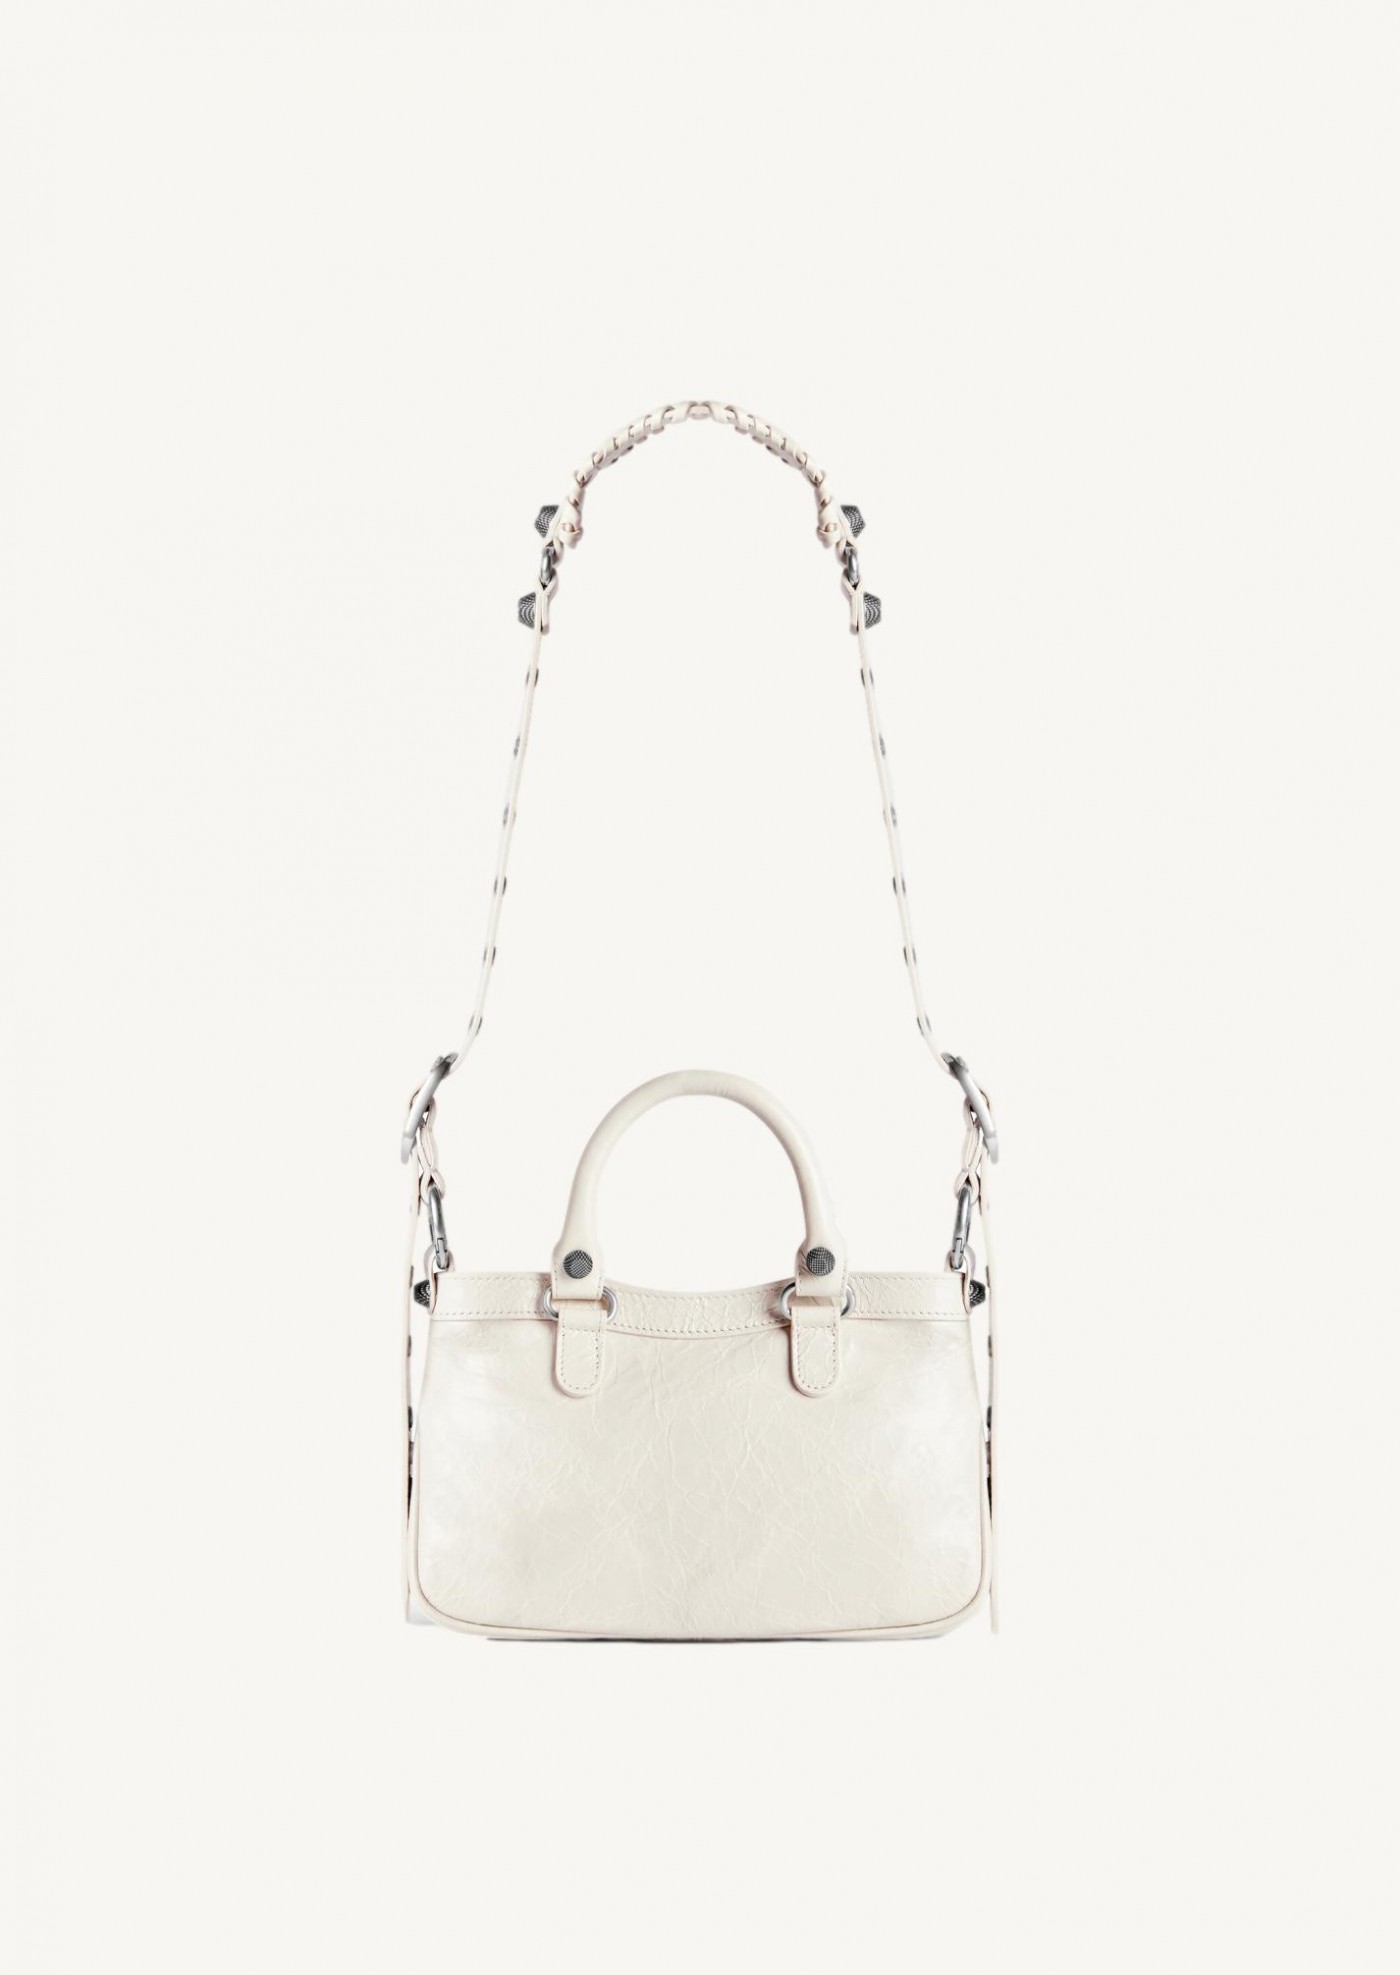 Neo cafgole small tote bag in off-white